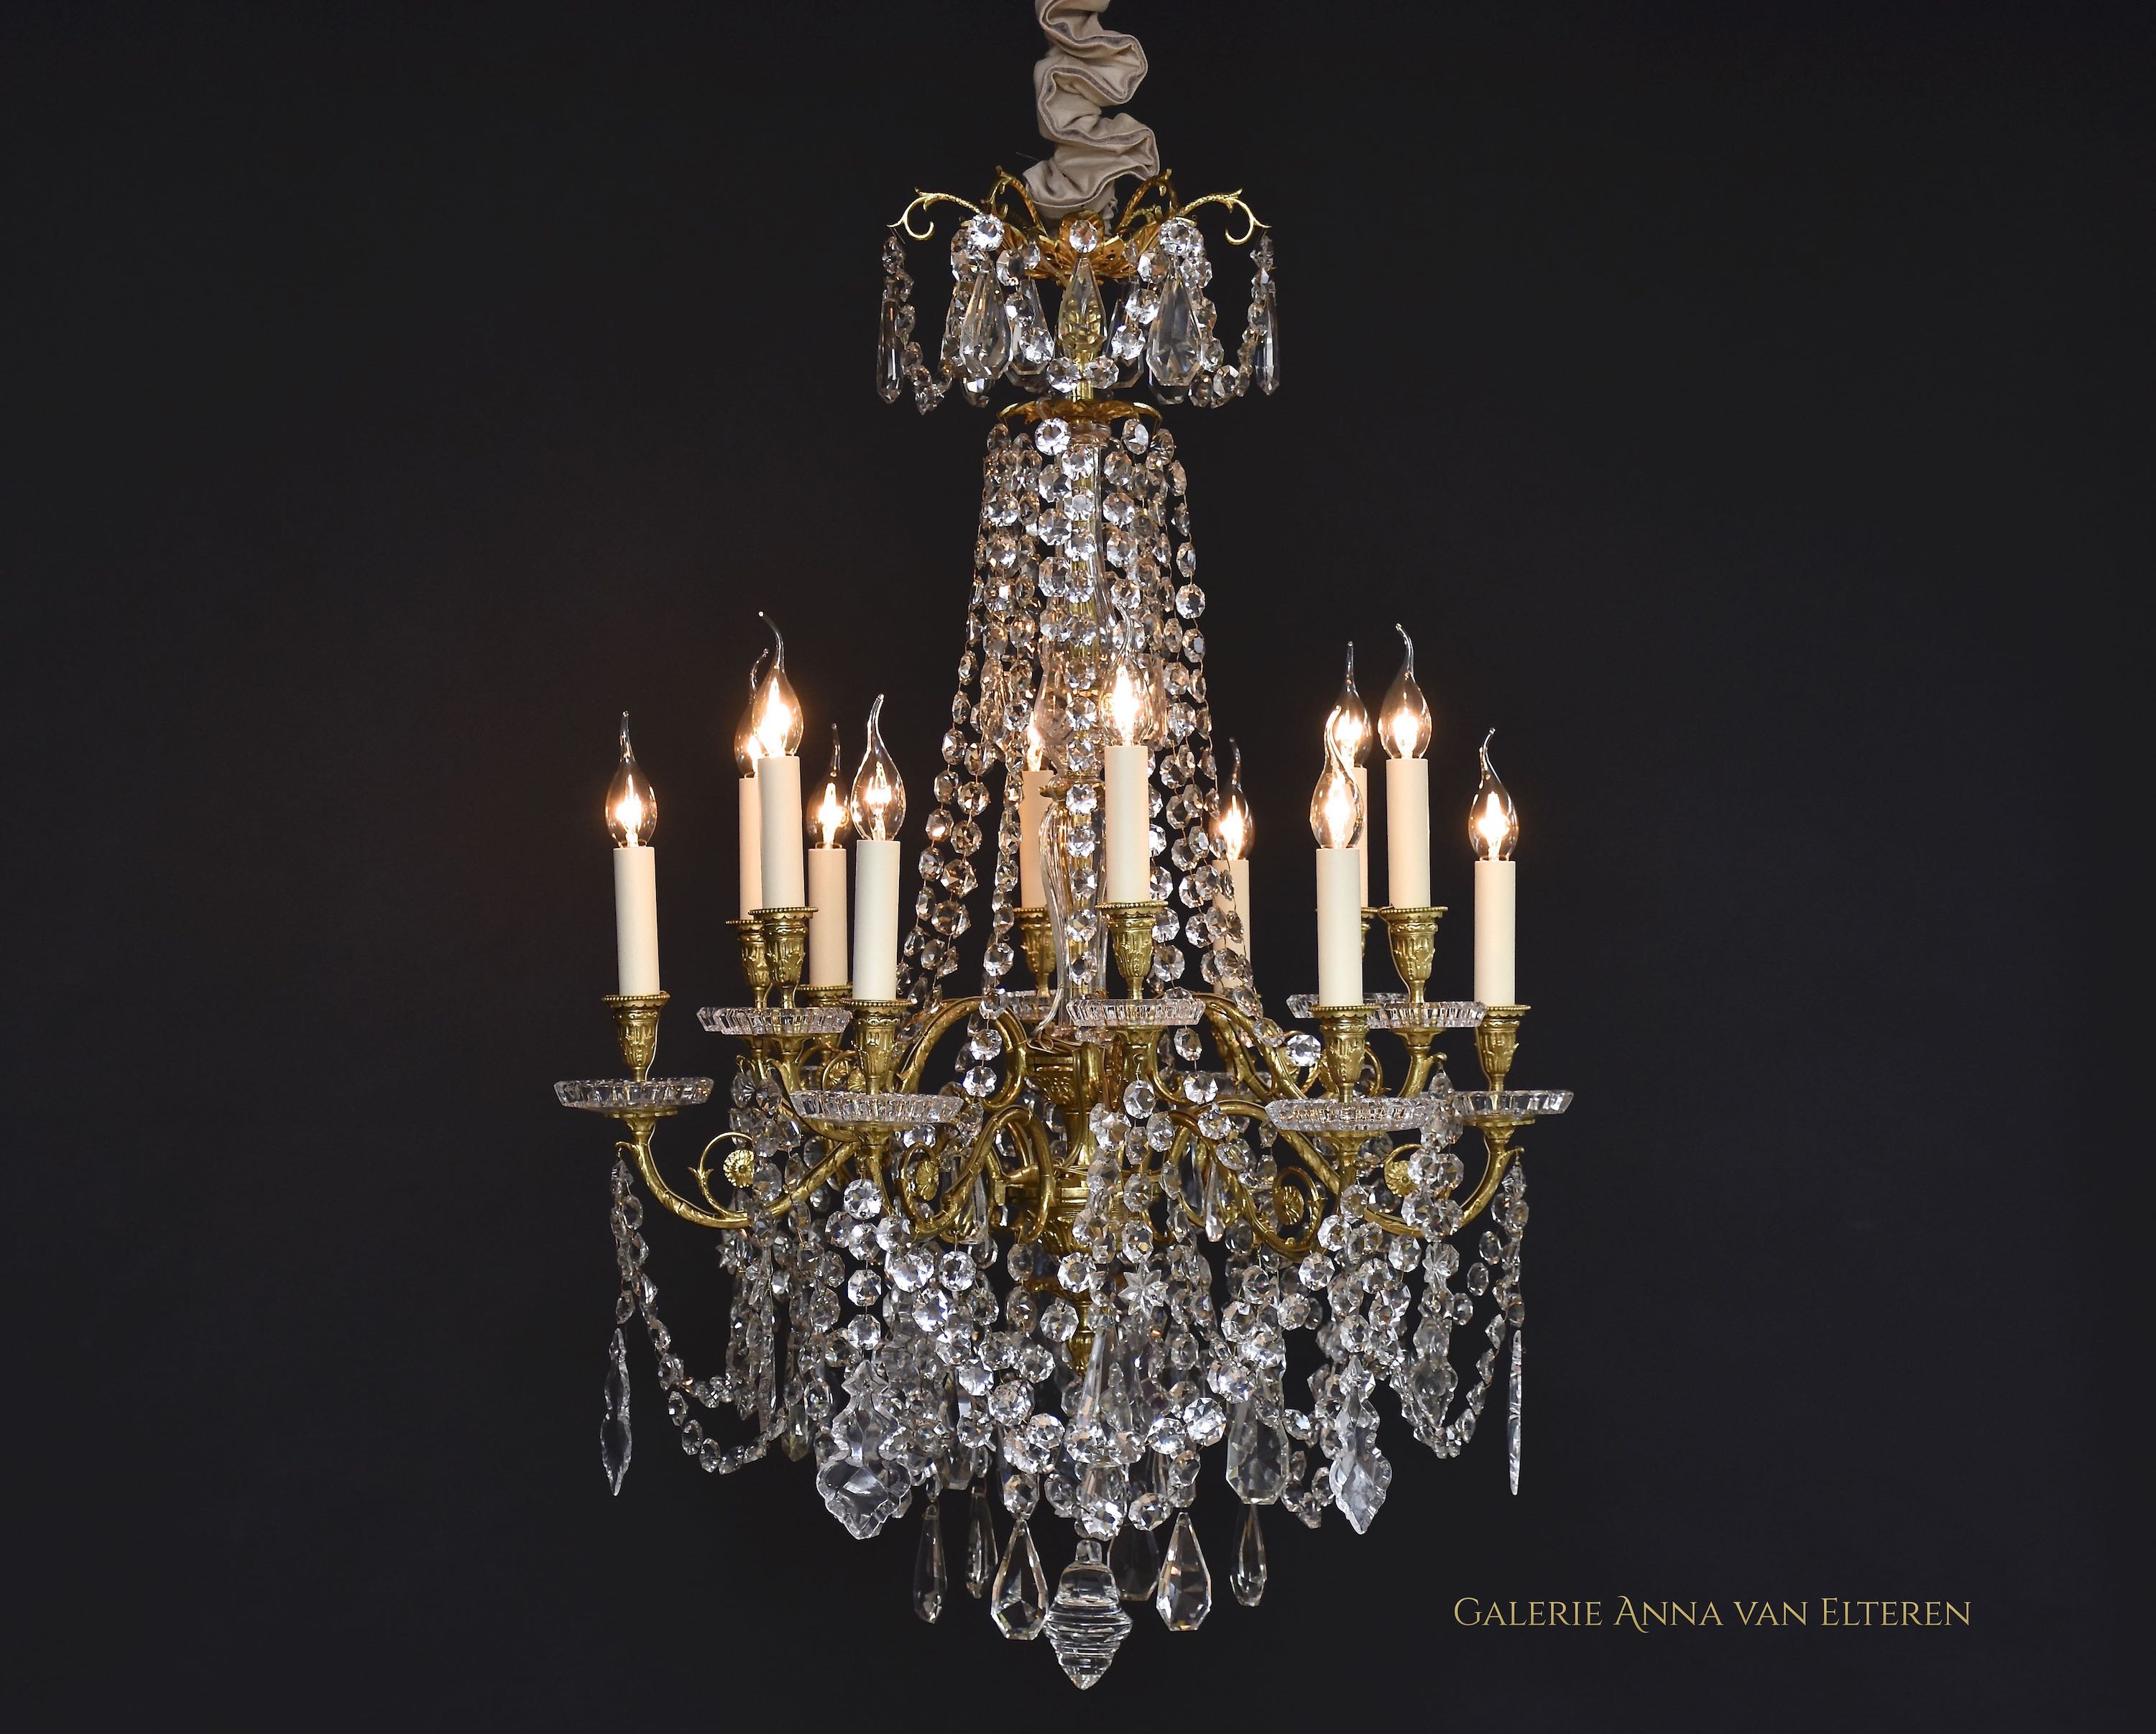 19th c. Baccarat chandelier in style of Louis XVI